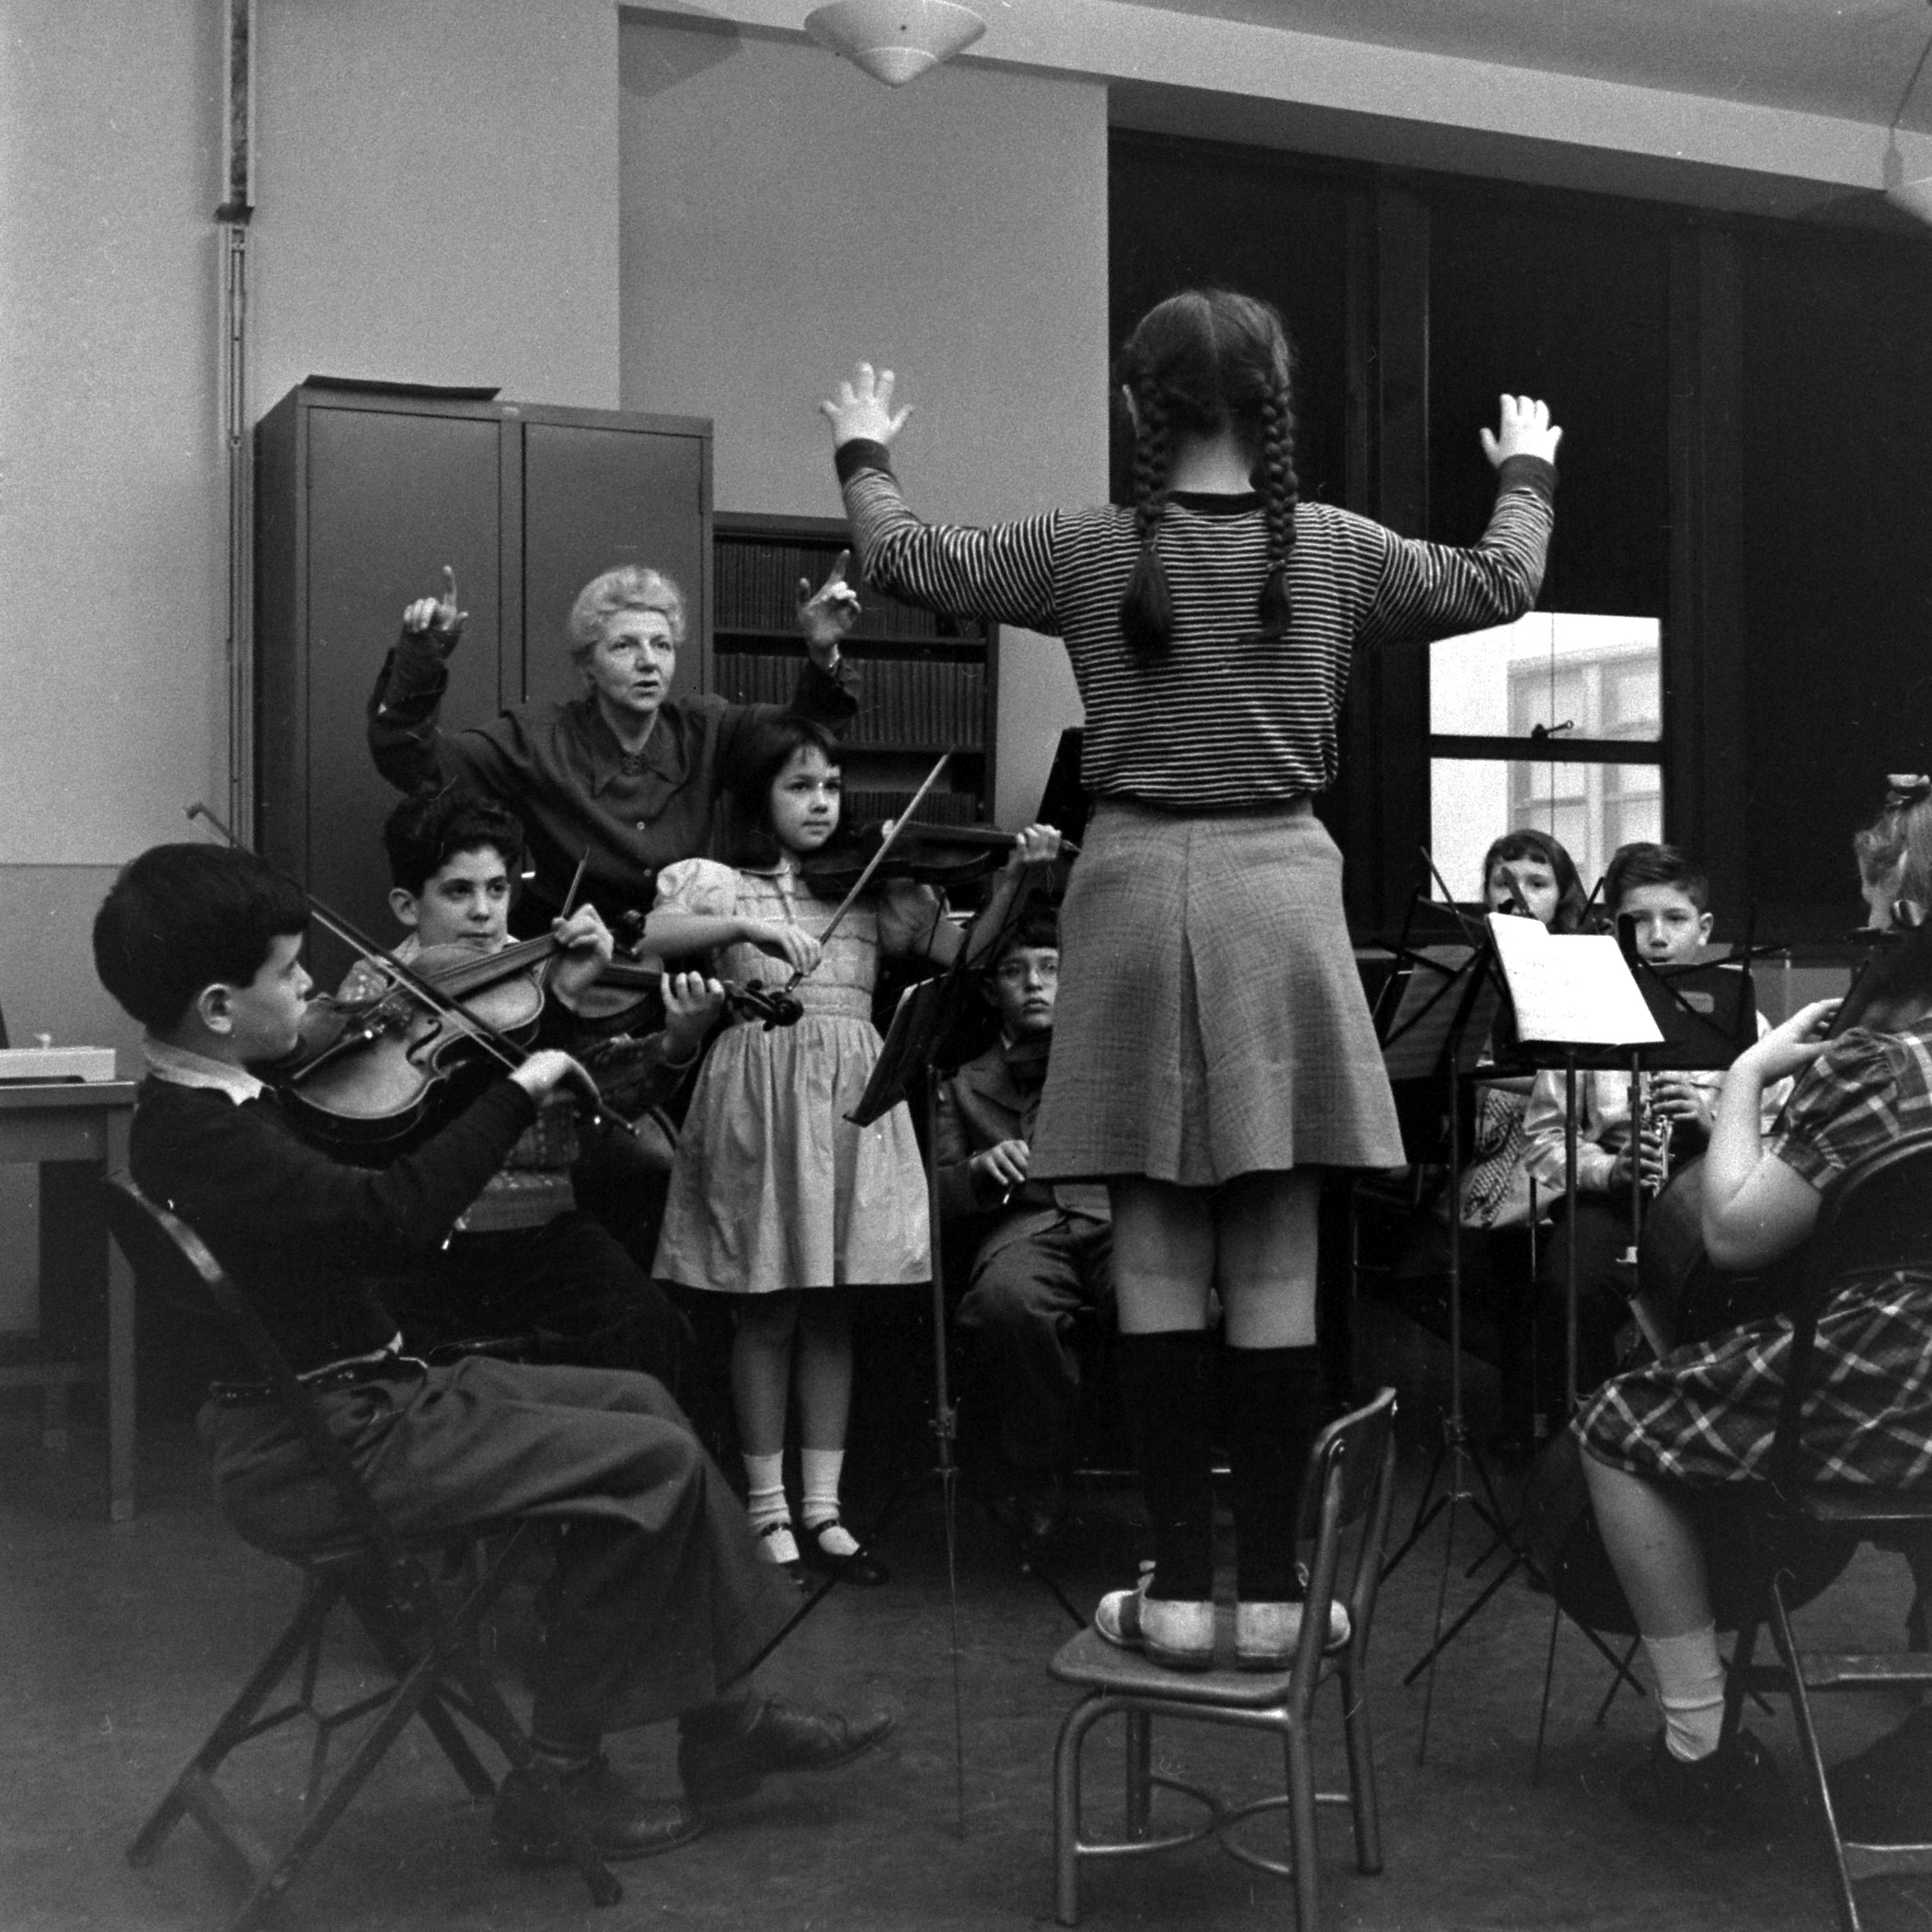 Photo from a public "genius school" for 3-to-11-year-olds at New York's Hunter College, 1948.